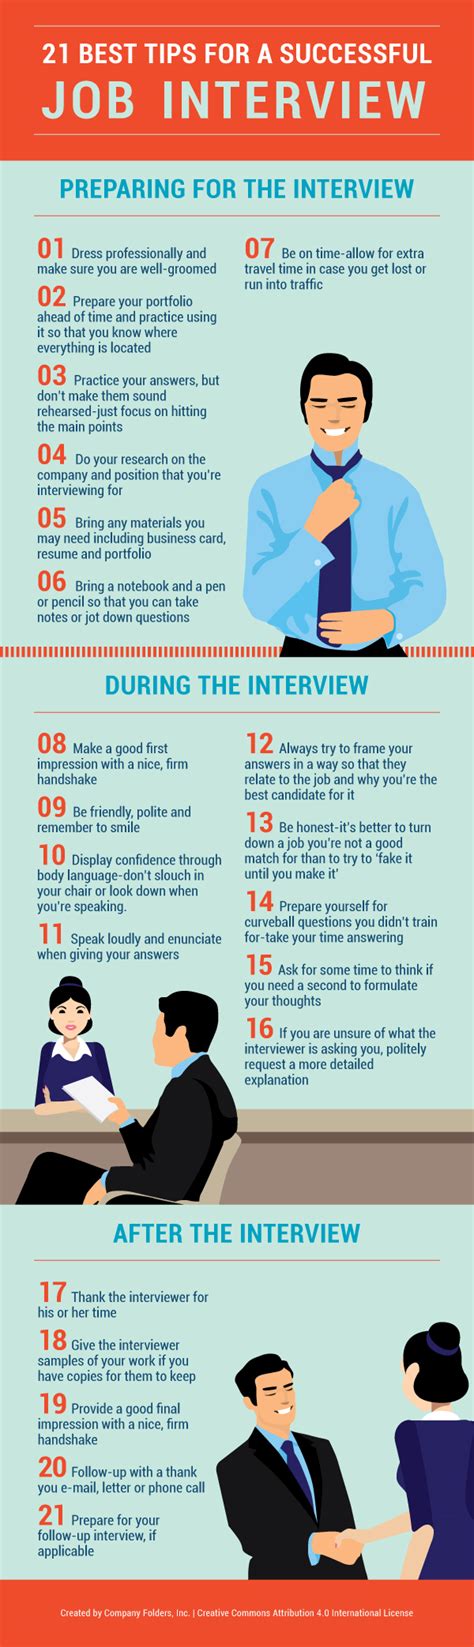 Best Tips For A Successful Job Interview Infographic